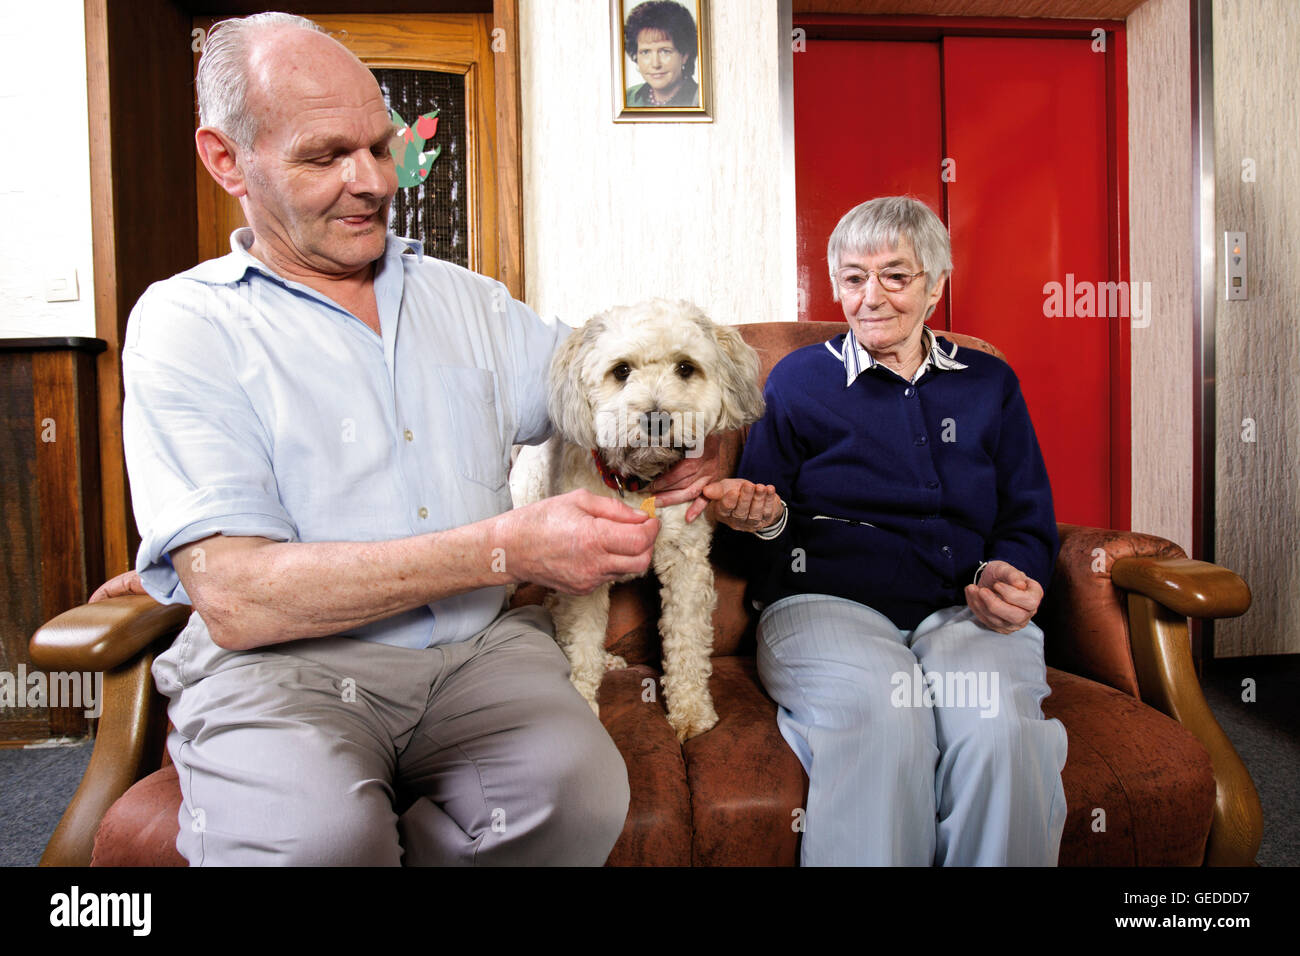 Elderly residents petting a dog at a nursing home Stock Photo